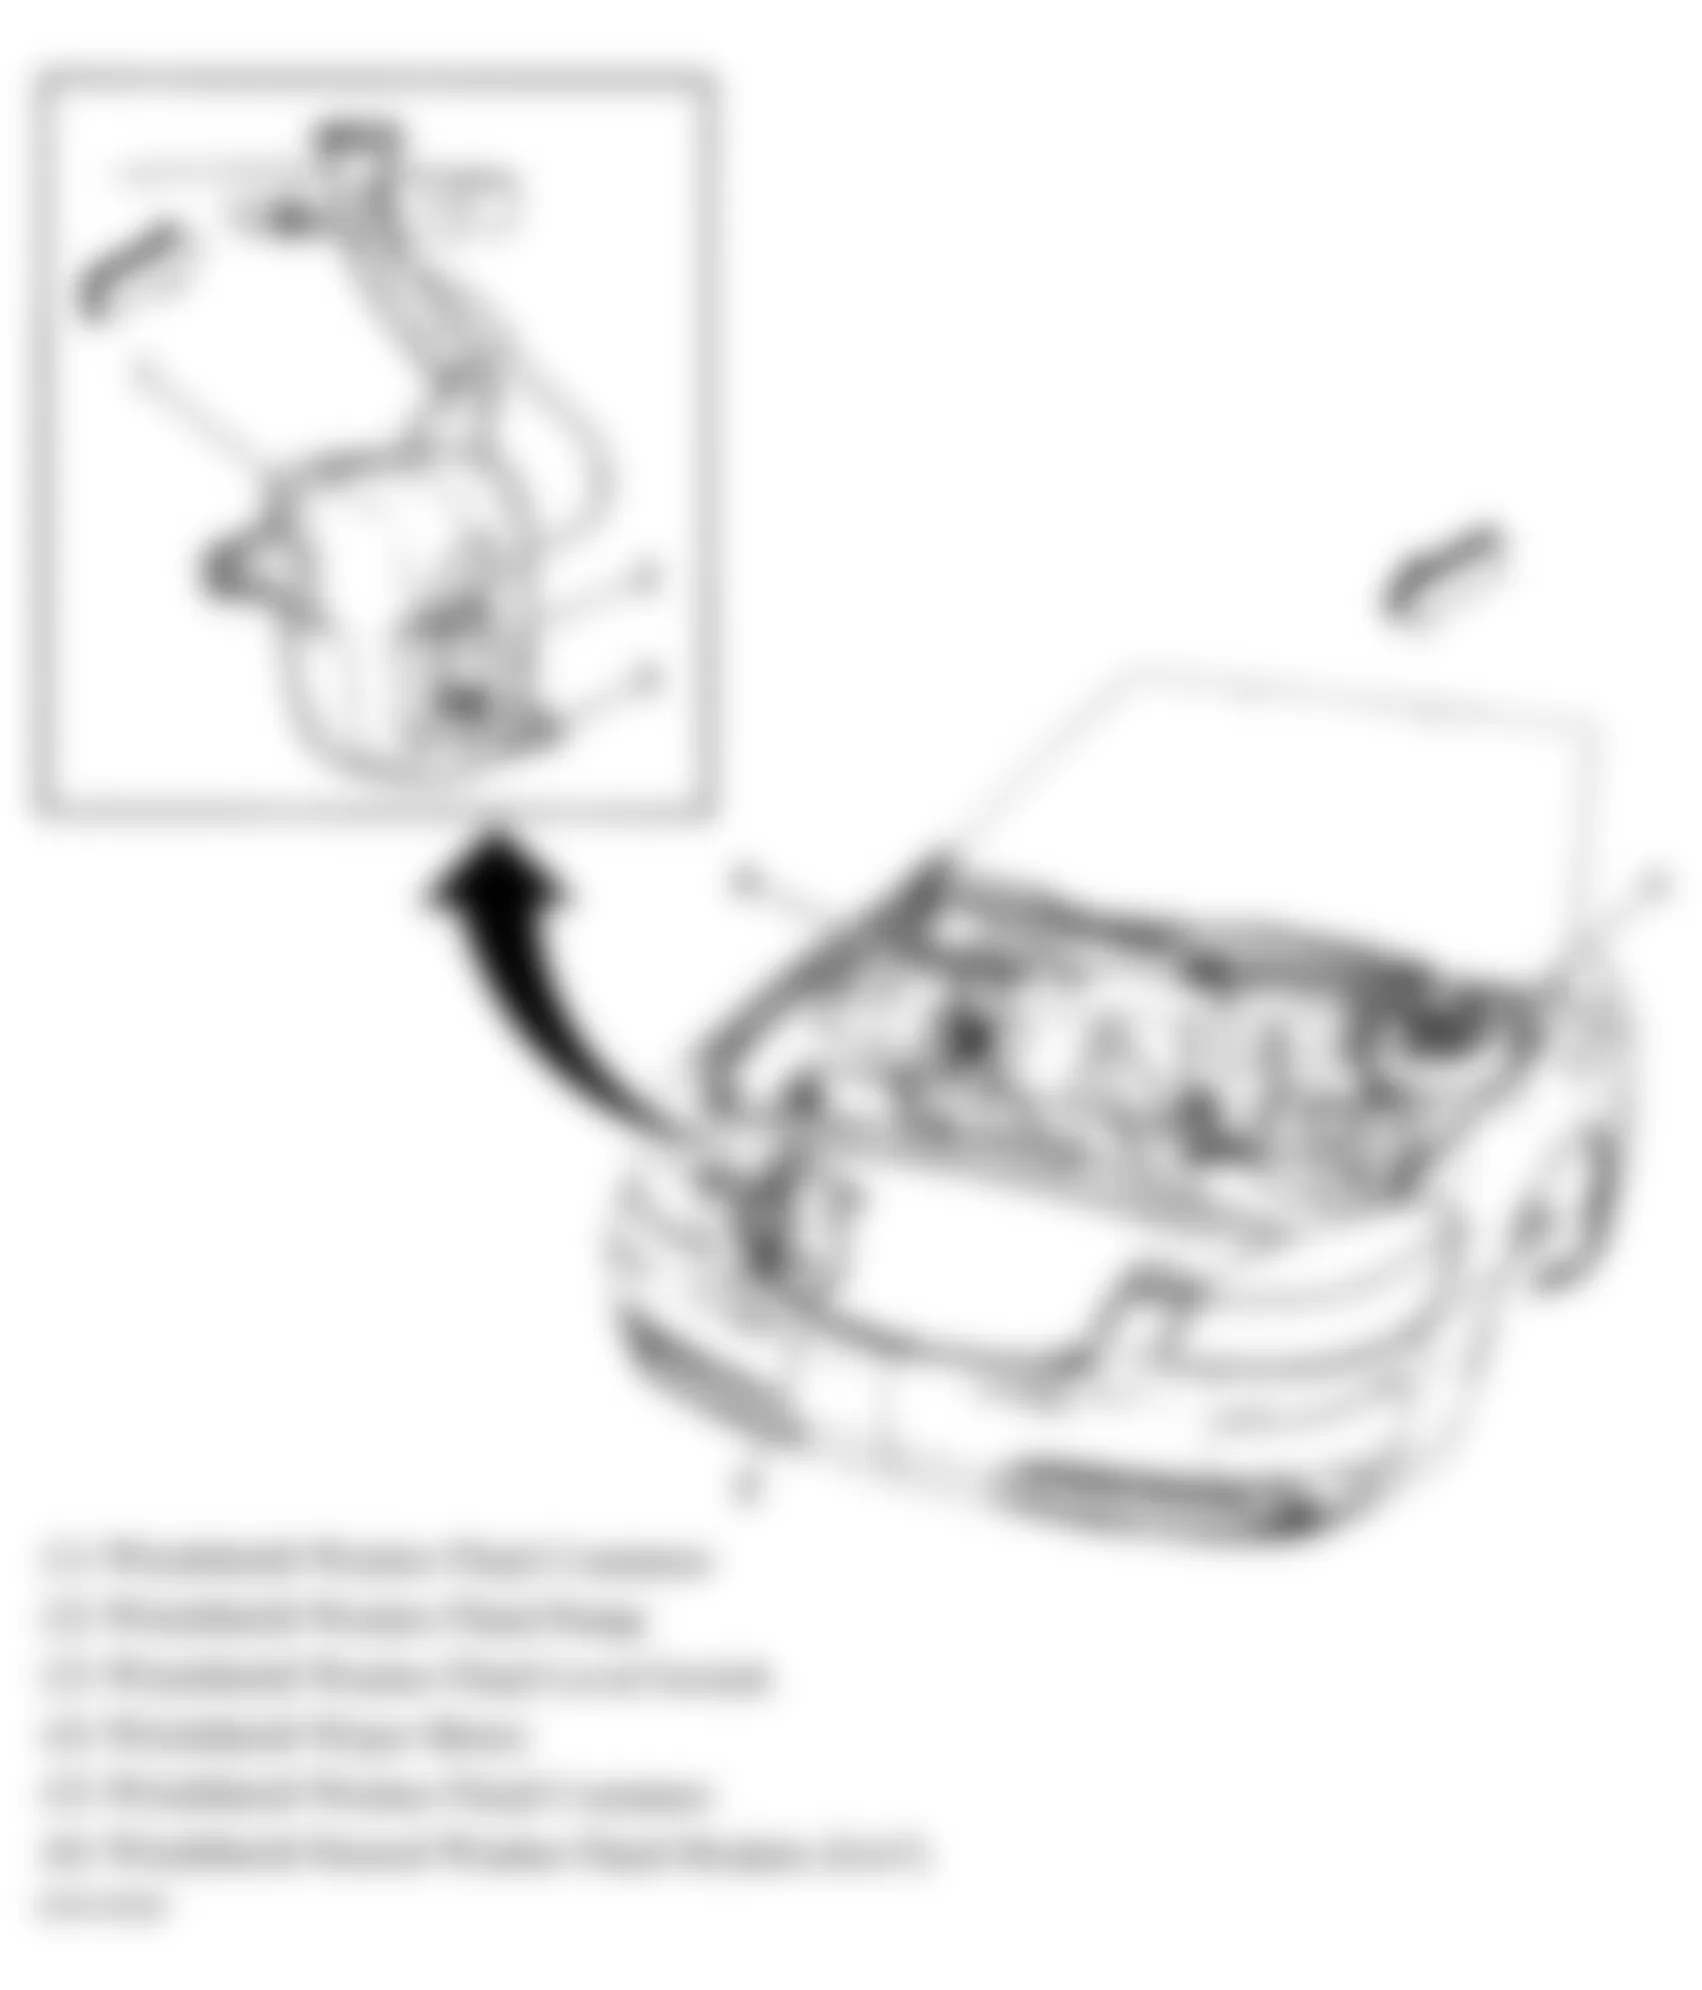 Buick Lucerne CXL 2008 - Component Locations -  Engine Compartment